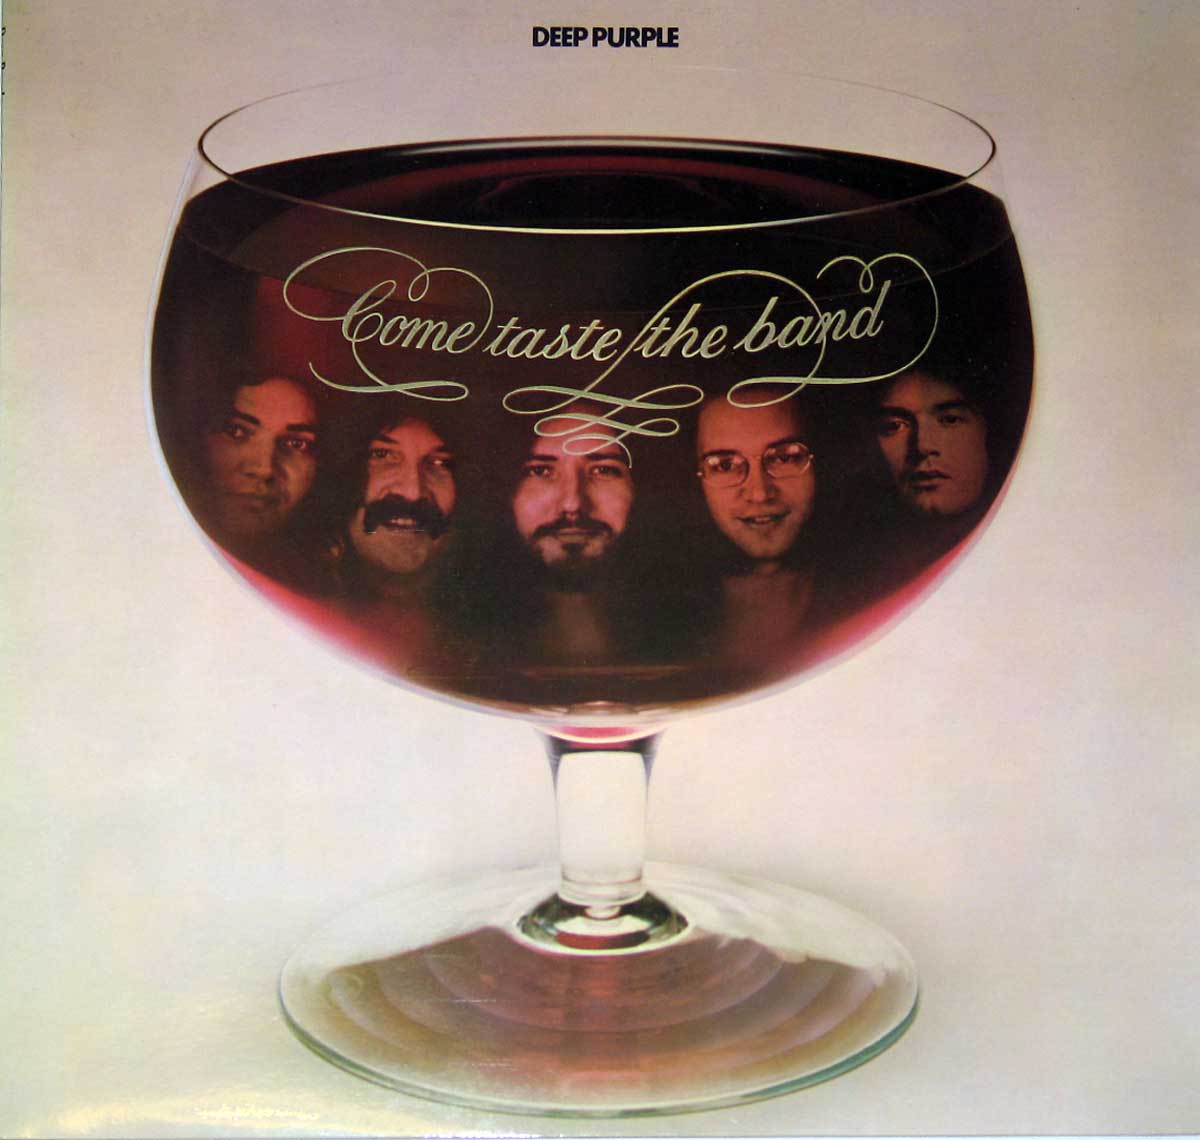 large album front cover photo of: DEEP PURPLE Come Taste The Band England 